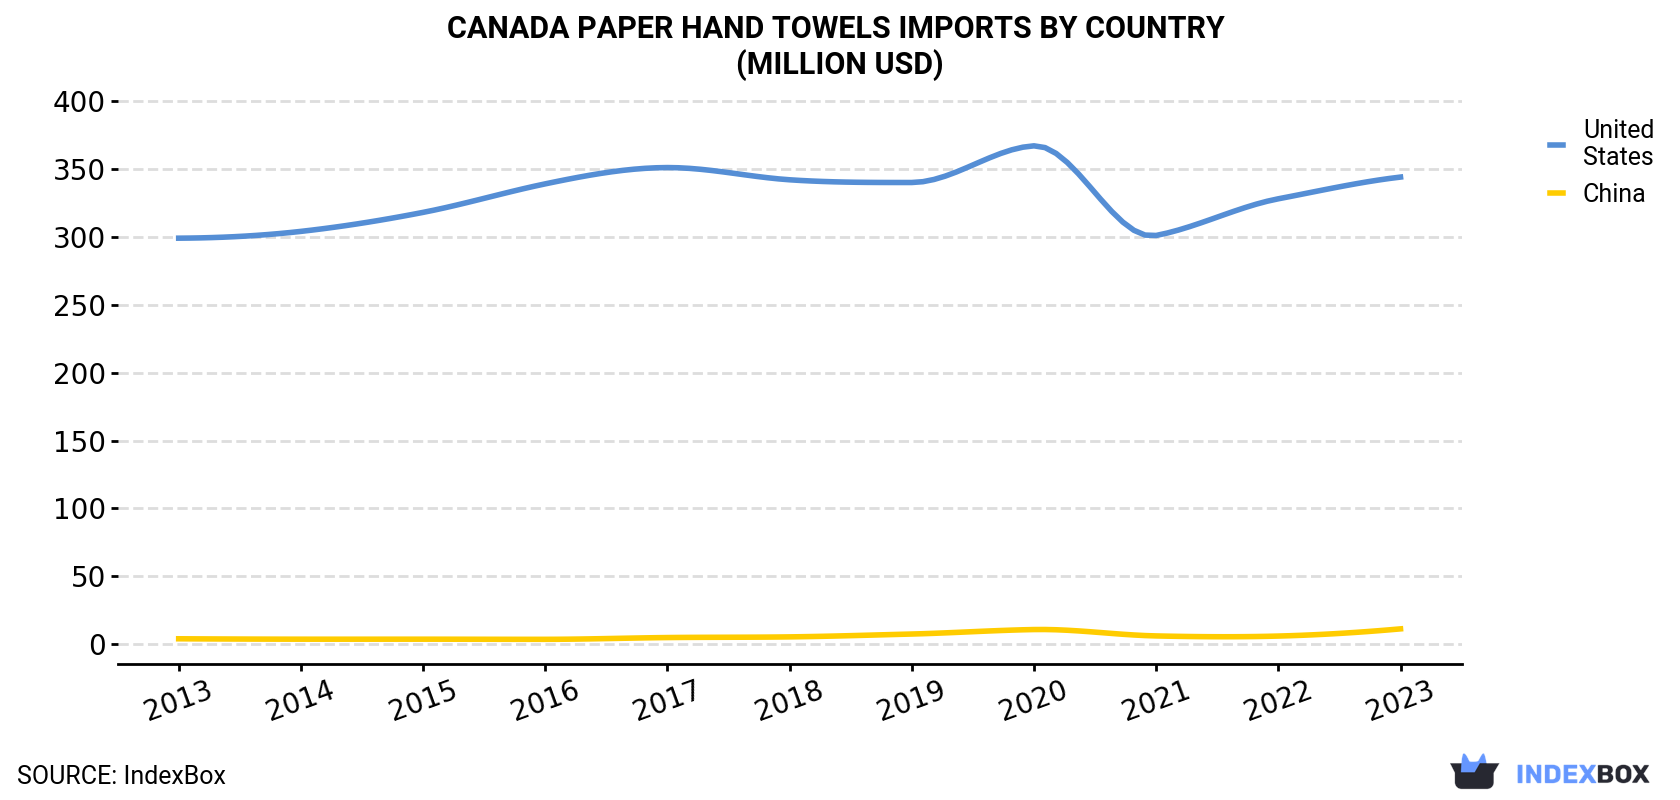 Canada Paper Hand Towels Imports By Country (Million USD)